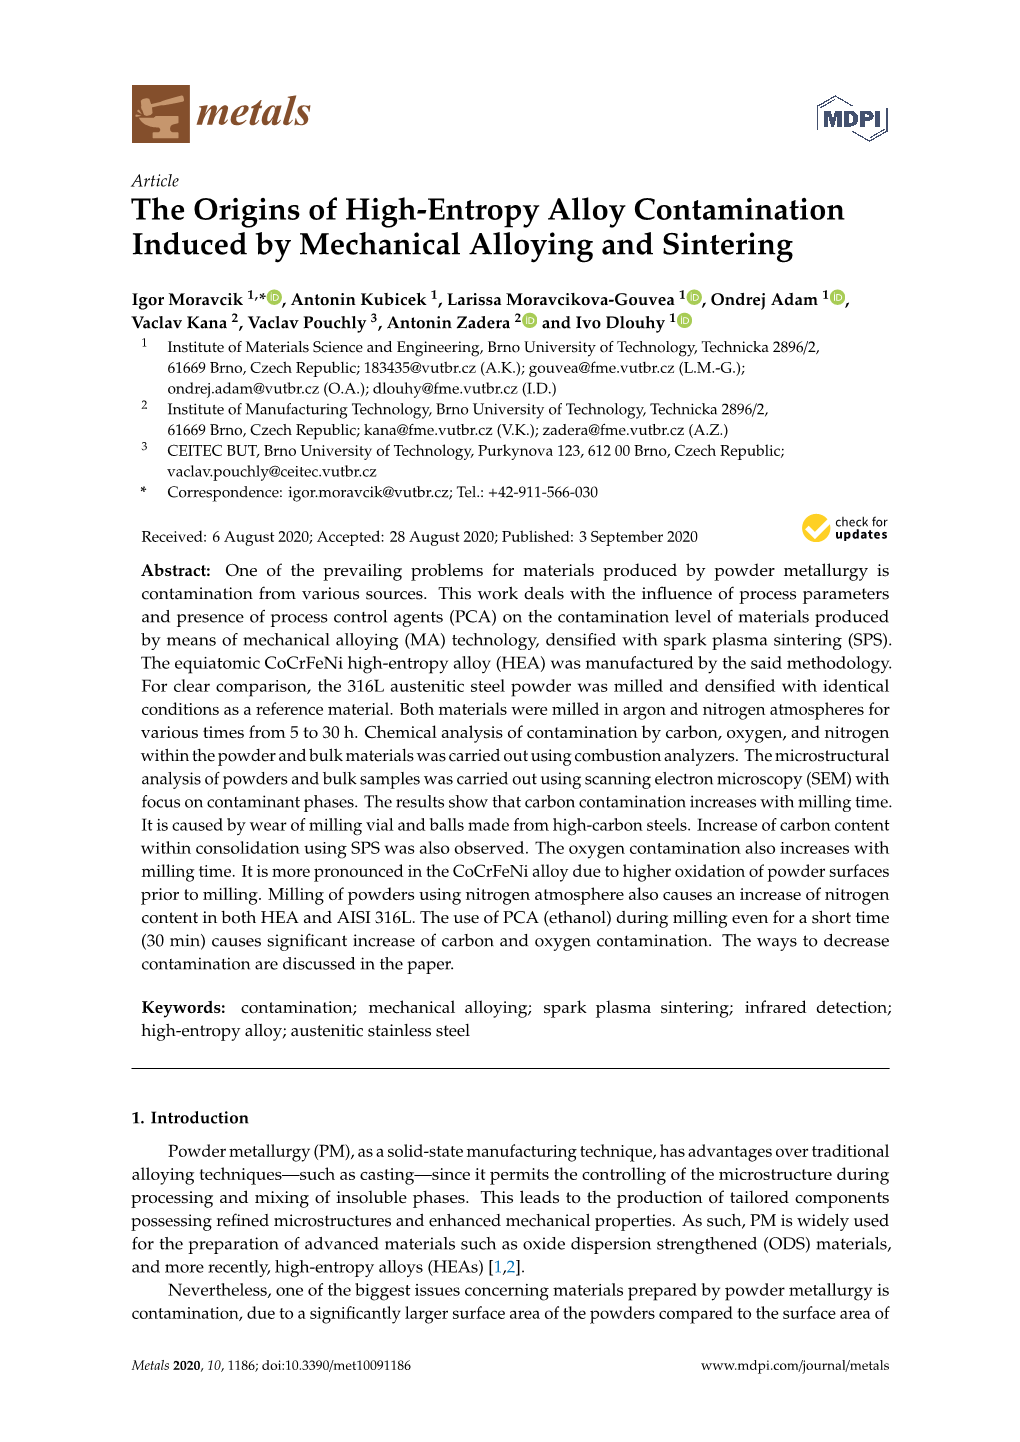 The Origins of High-Entropy Alloy Contamination Induced by Mechanical Alloying and Sintering